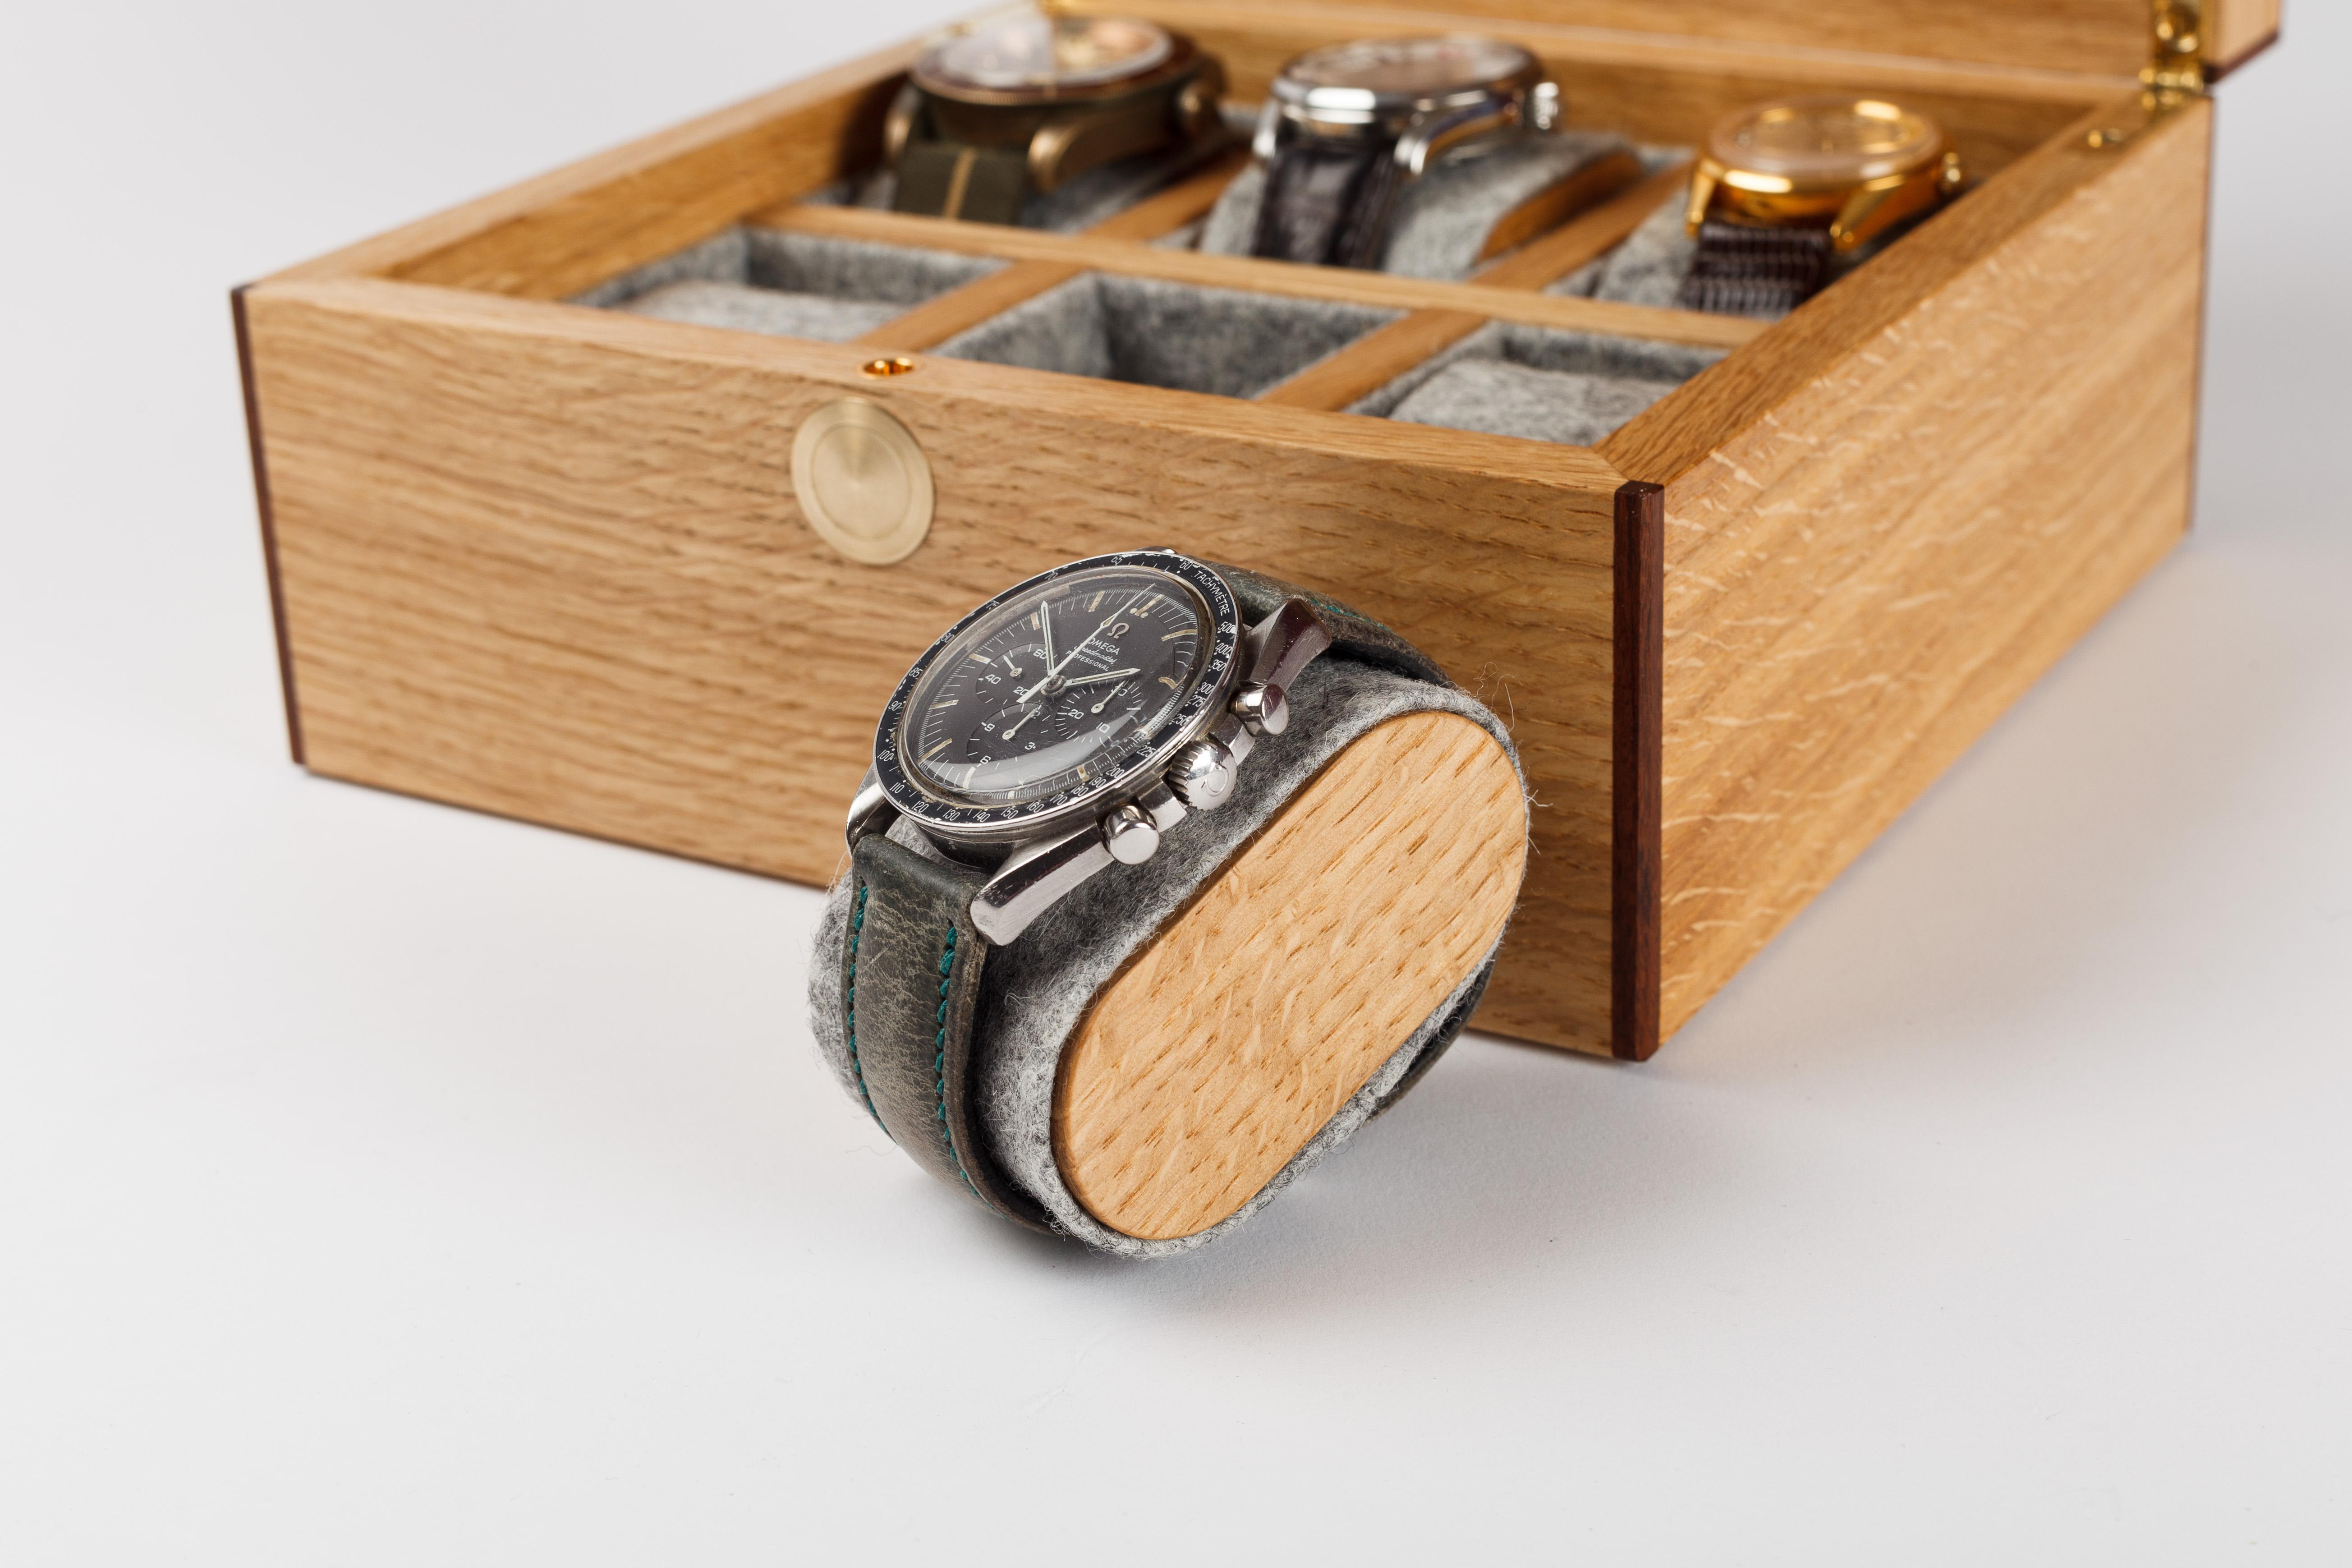 6 Watch box in Scottish oak, with veneered oak burl lid. The box is finished with solid rosewood edge banding and beautifully figured book-matched walnut on the underside of the lid. The individual watch compartments are lined in 100% wool felt and